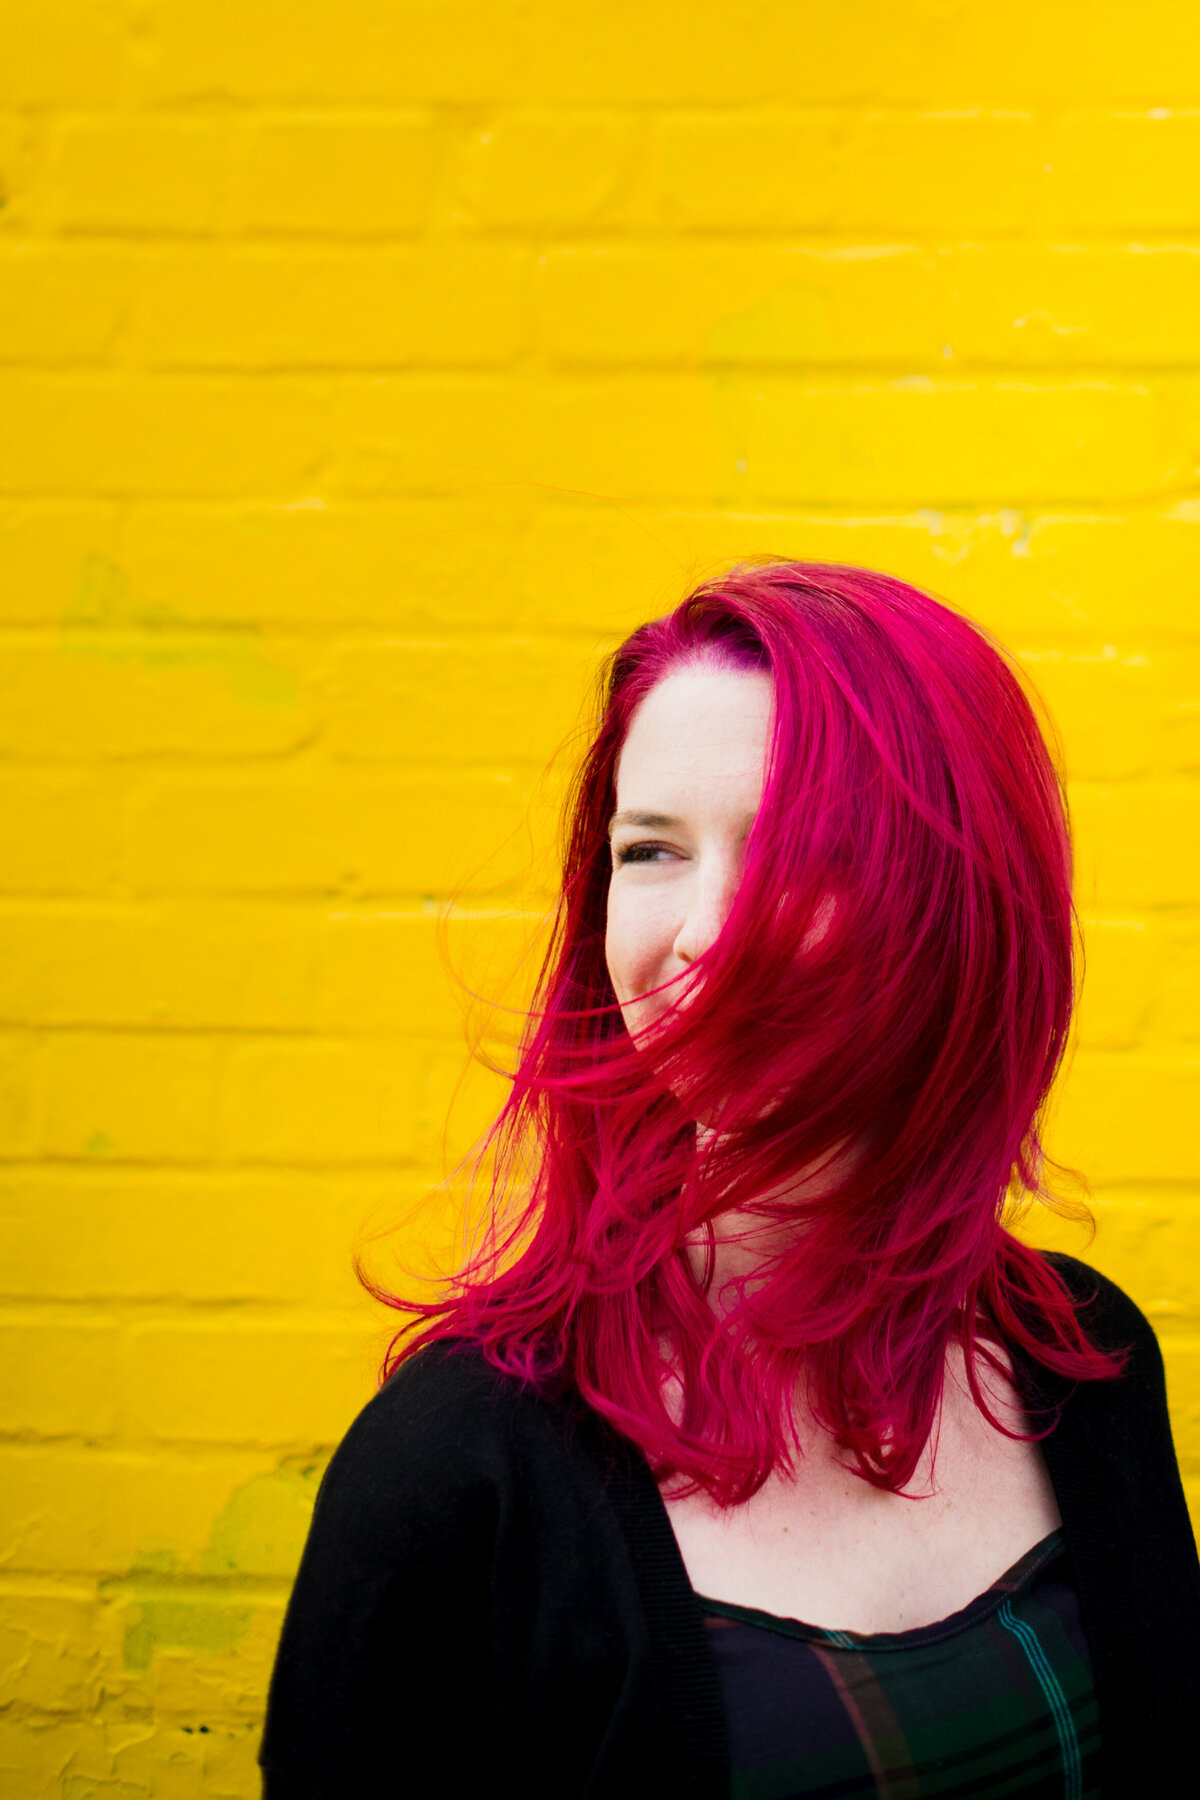 A person with red hair standing in front of a yellow wall.